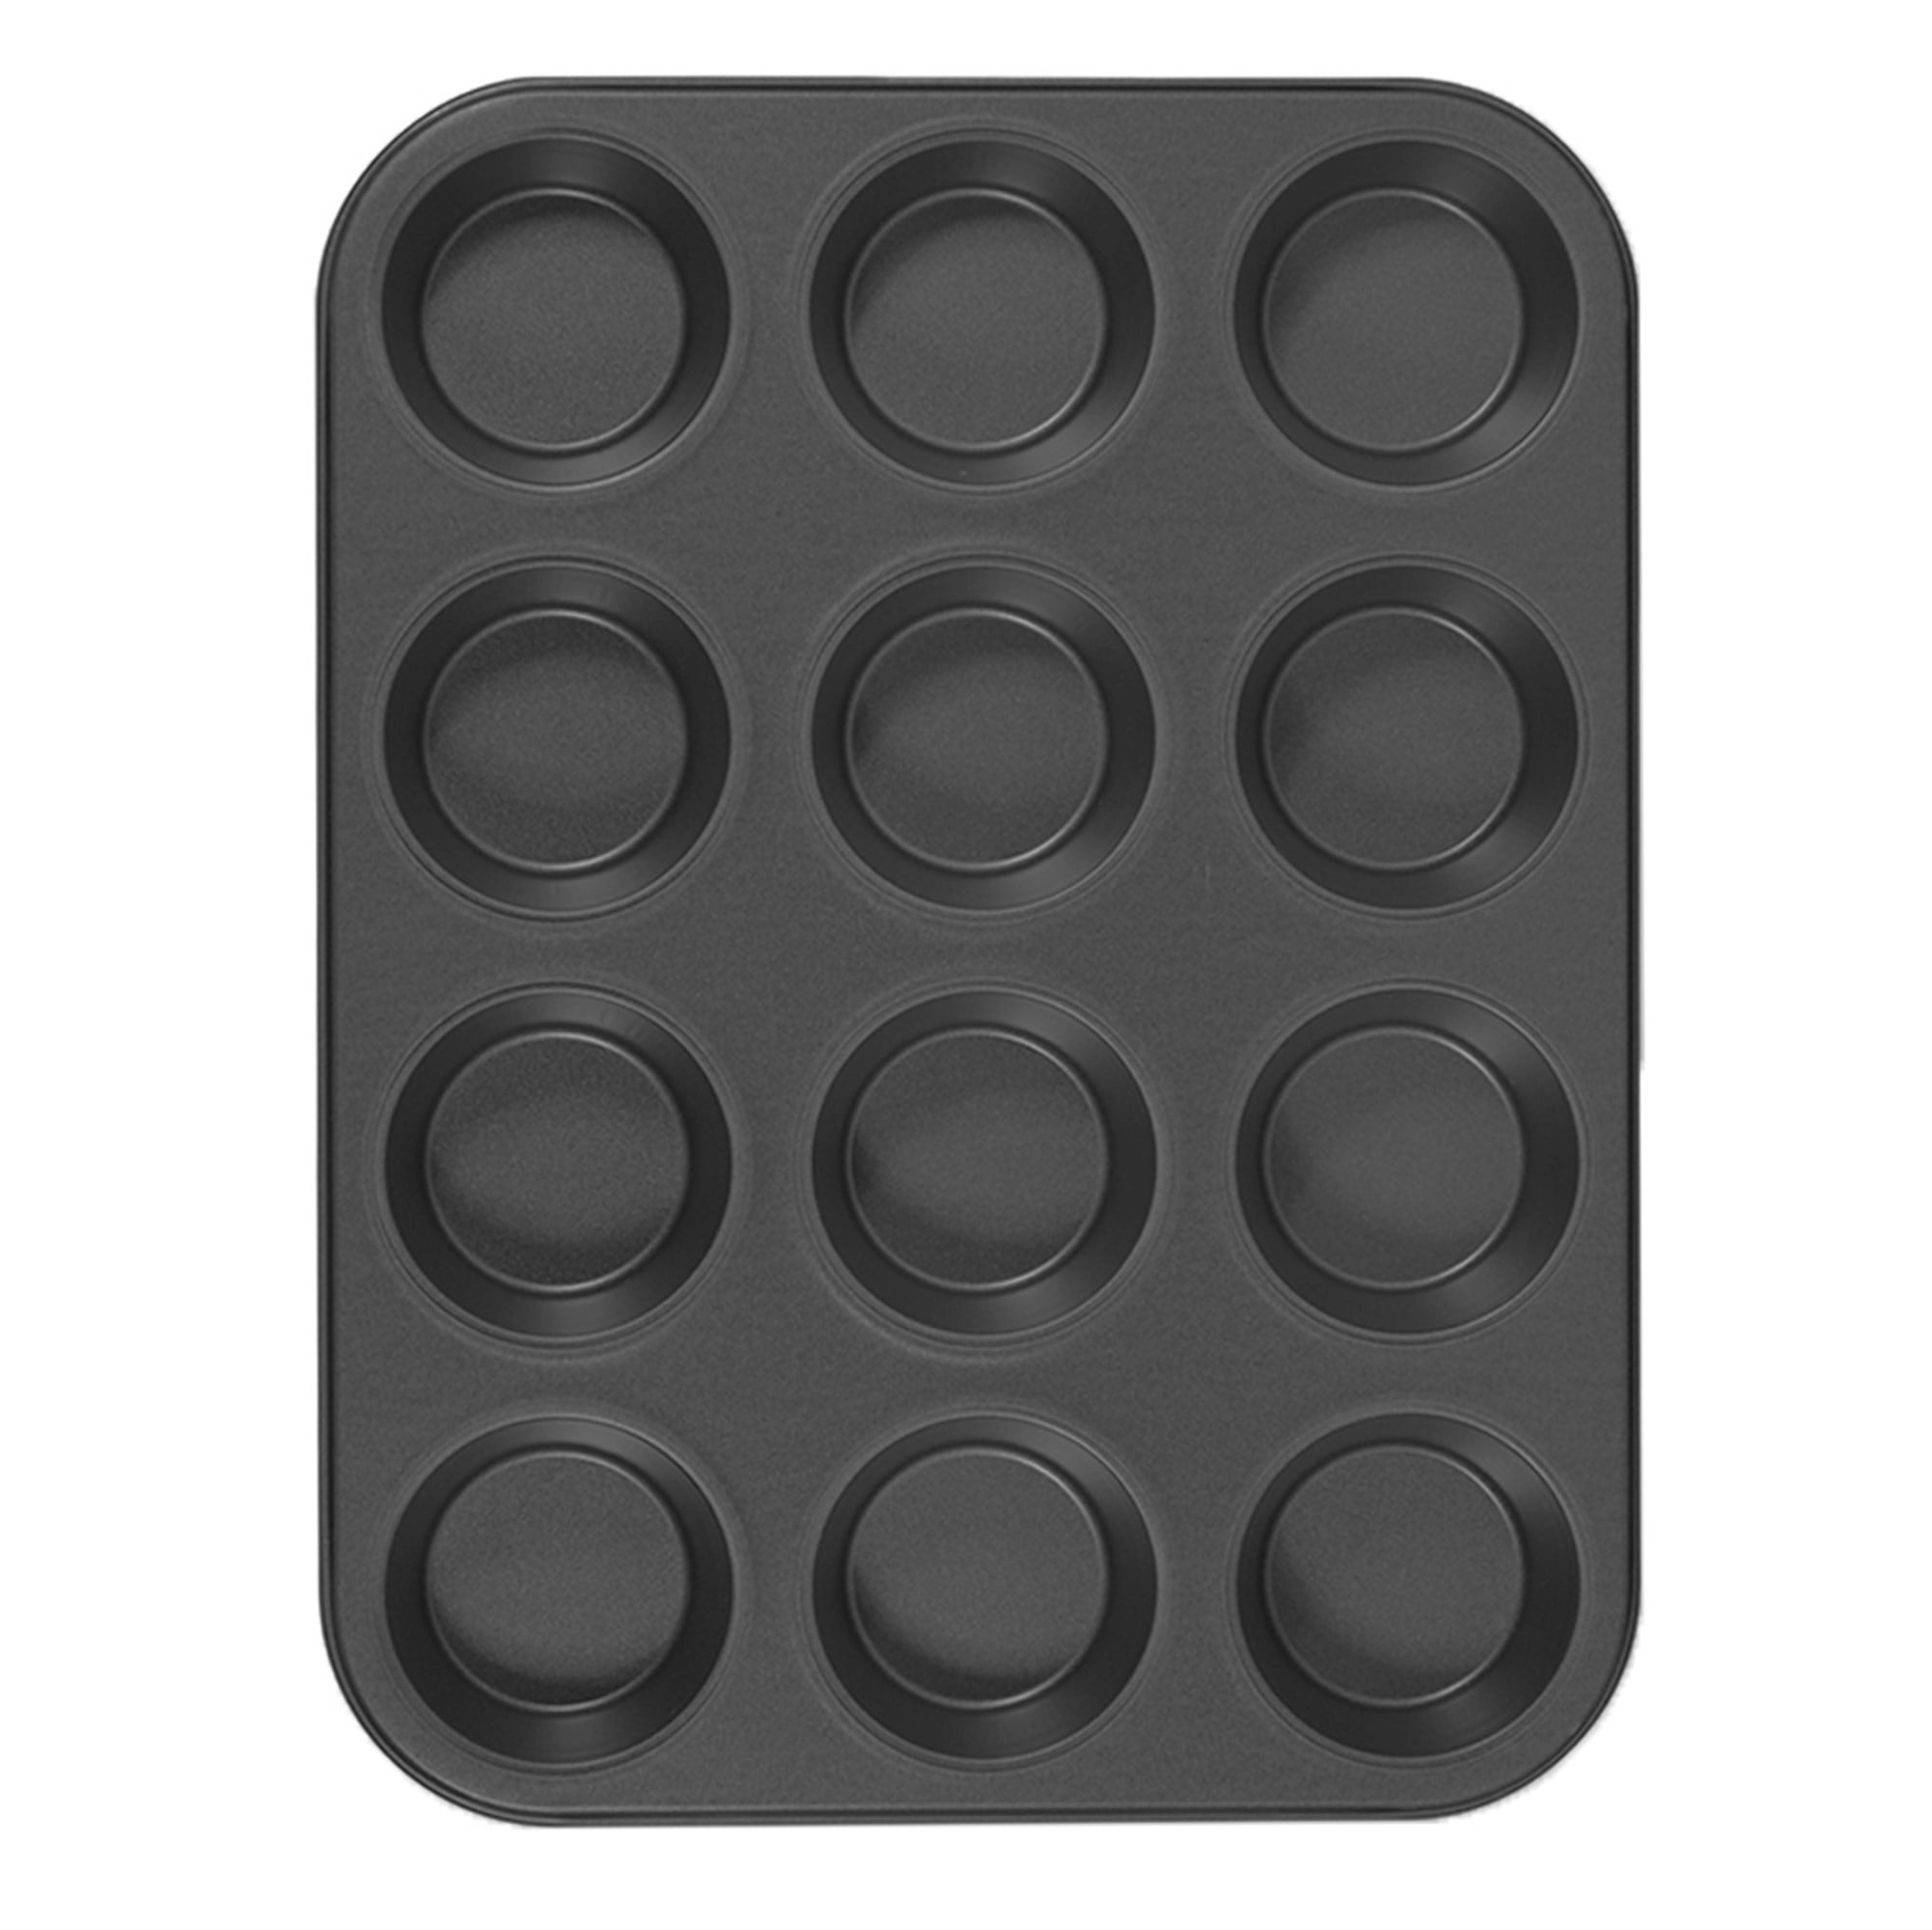 Eternal 12 Cup Non-Stick Steel Muffin Pan with Lid